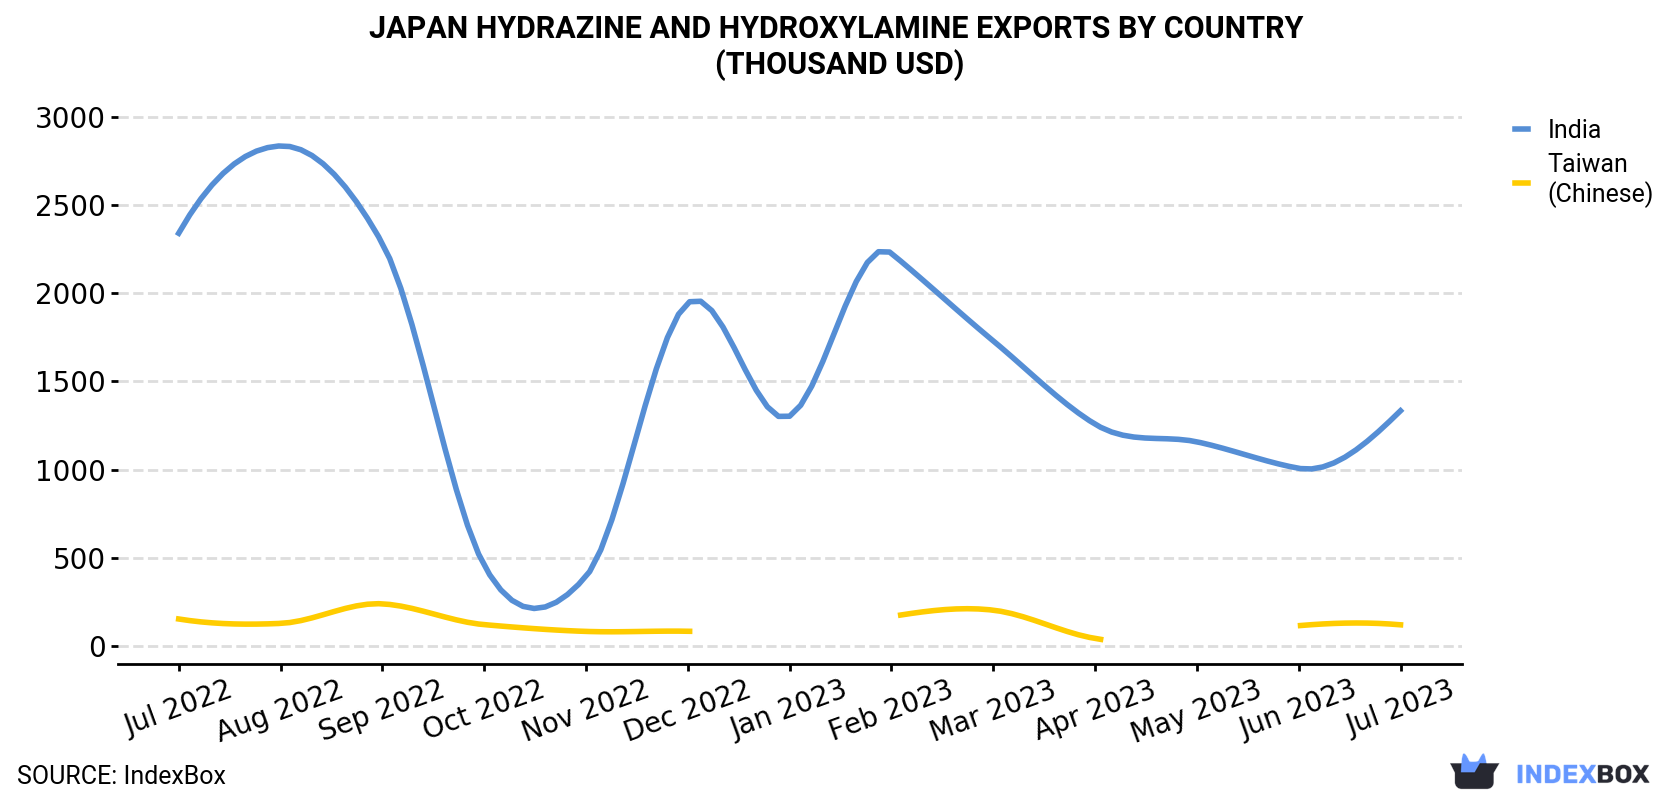 Japan Hydrazine And Hydroxylamine Exports By Country (Thousand USD)